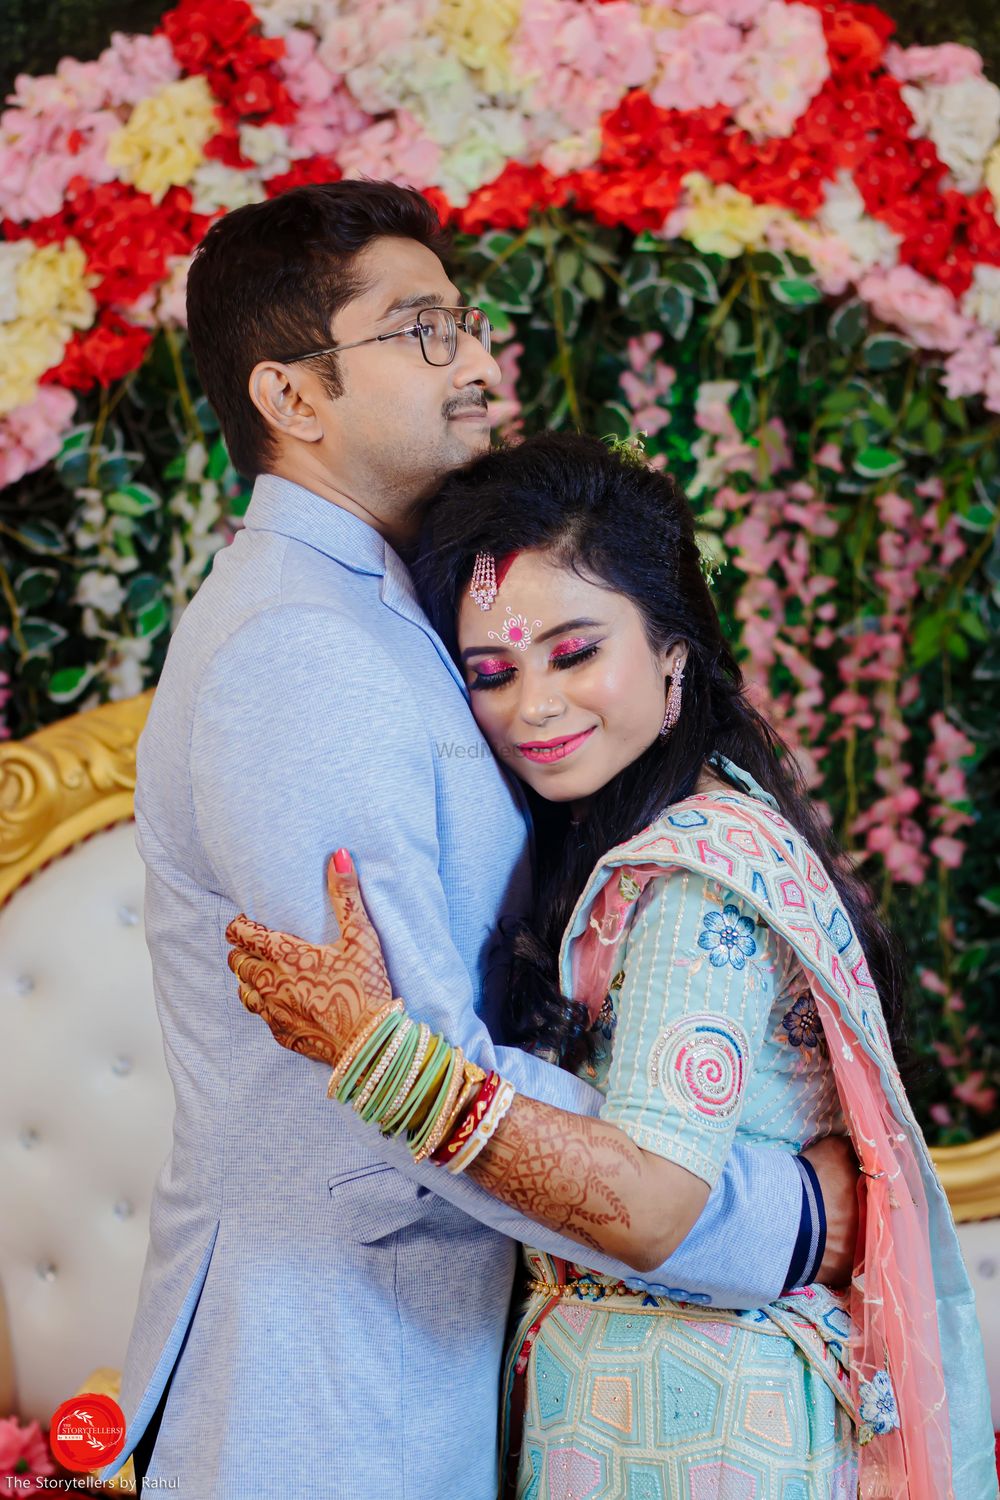 Photo From Wedding Story of Sumit & Arpita - By The Storytellers by Rahul